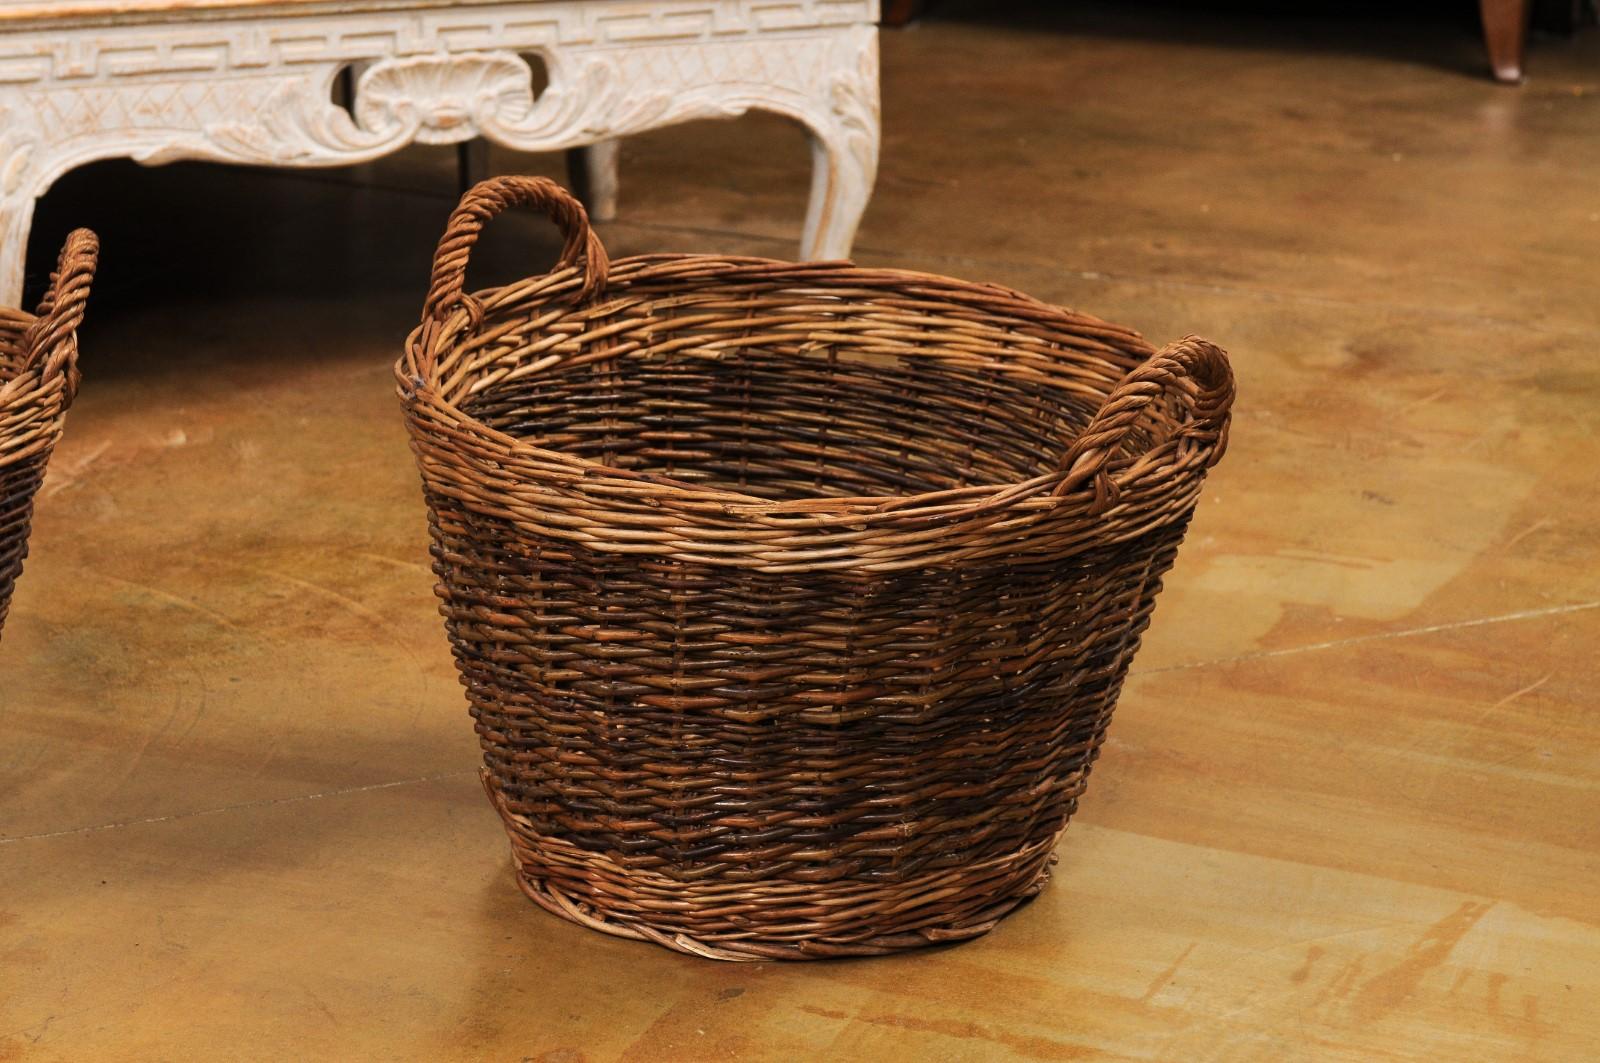 Woven Handmade English Two Toned Wicker Baskets from Devon with Double Handles, Each